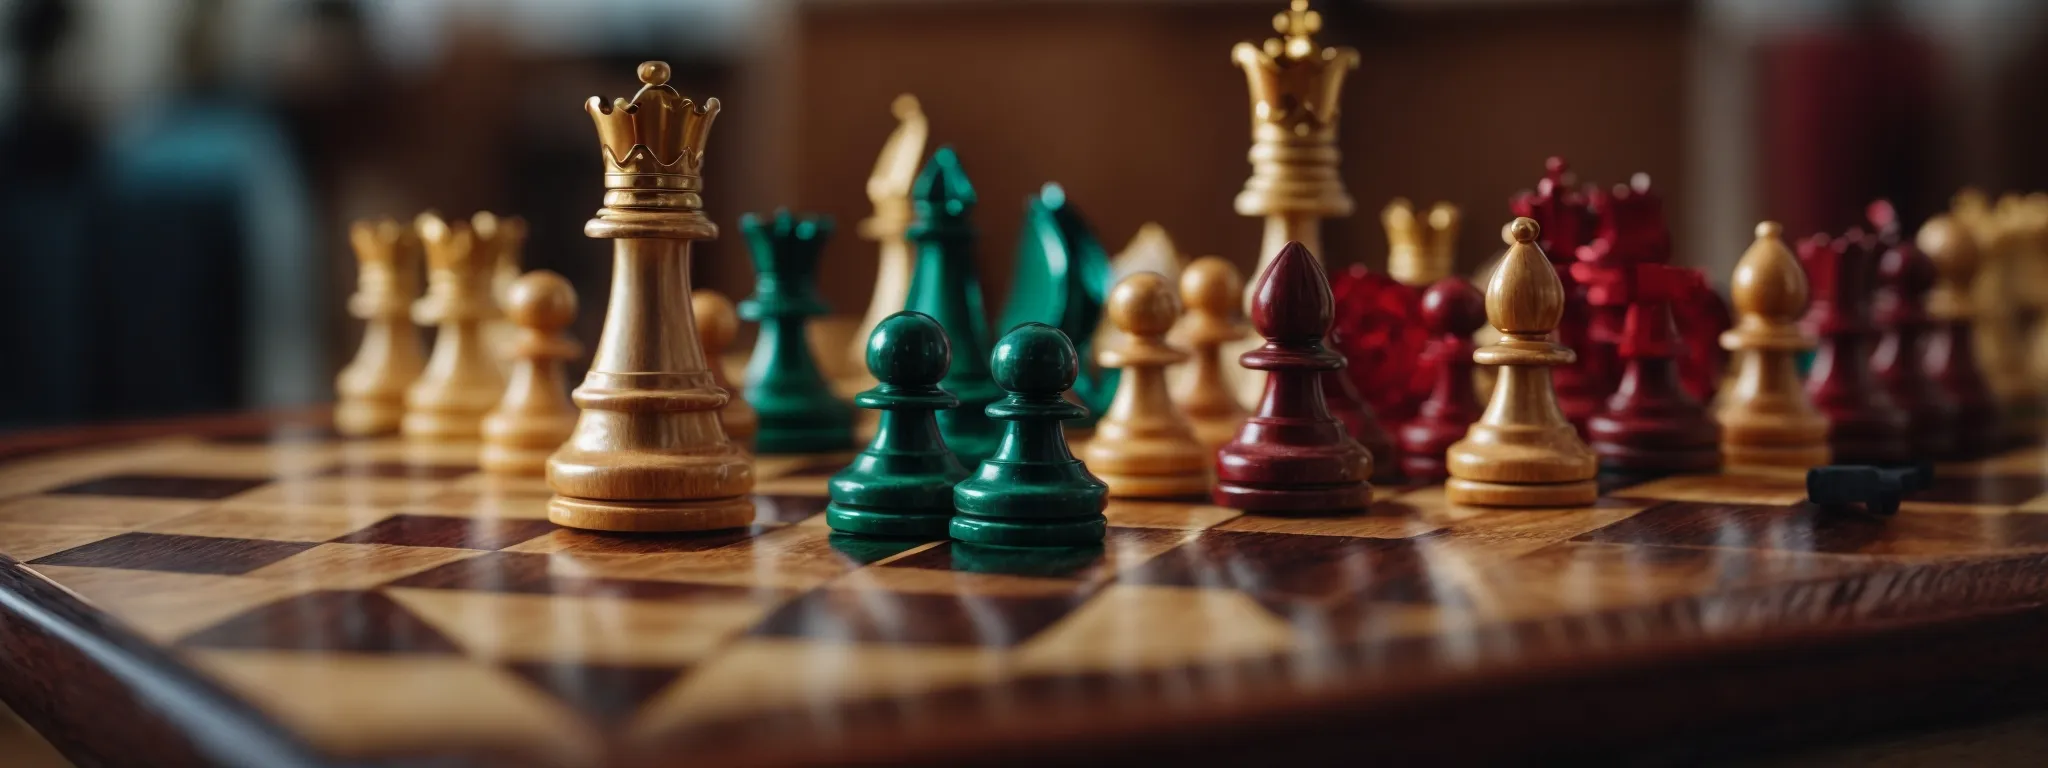 a close-up on a vibrant chessboard with discerning pieces engaged in mid-game, symbolizing strategic seo battle.